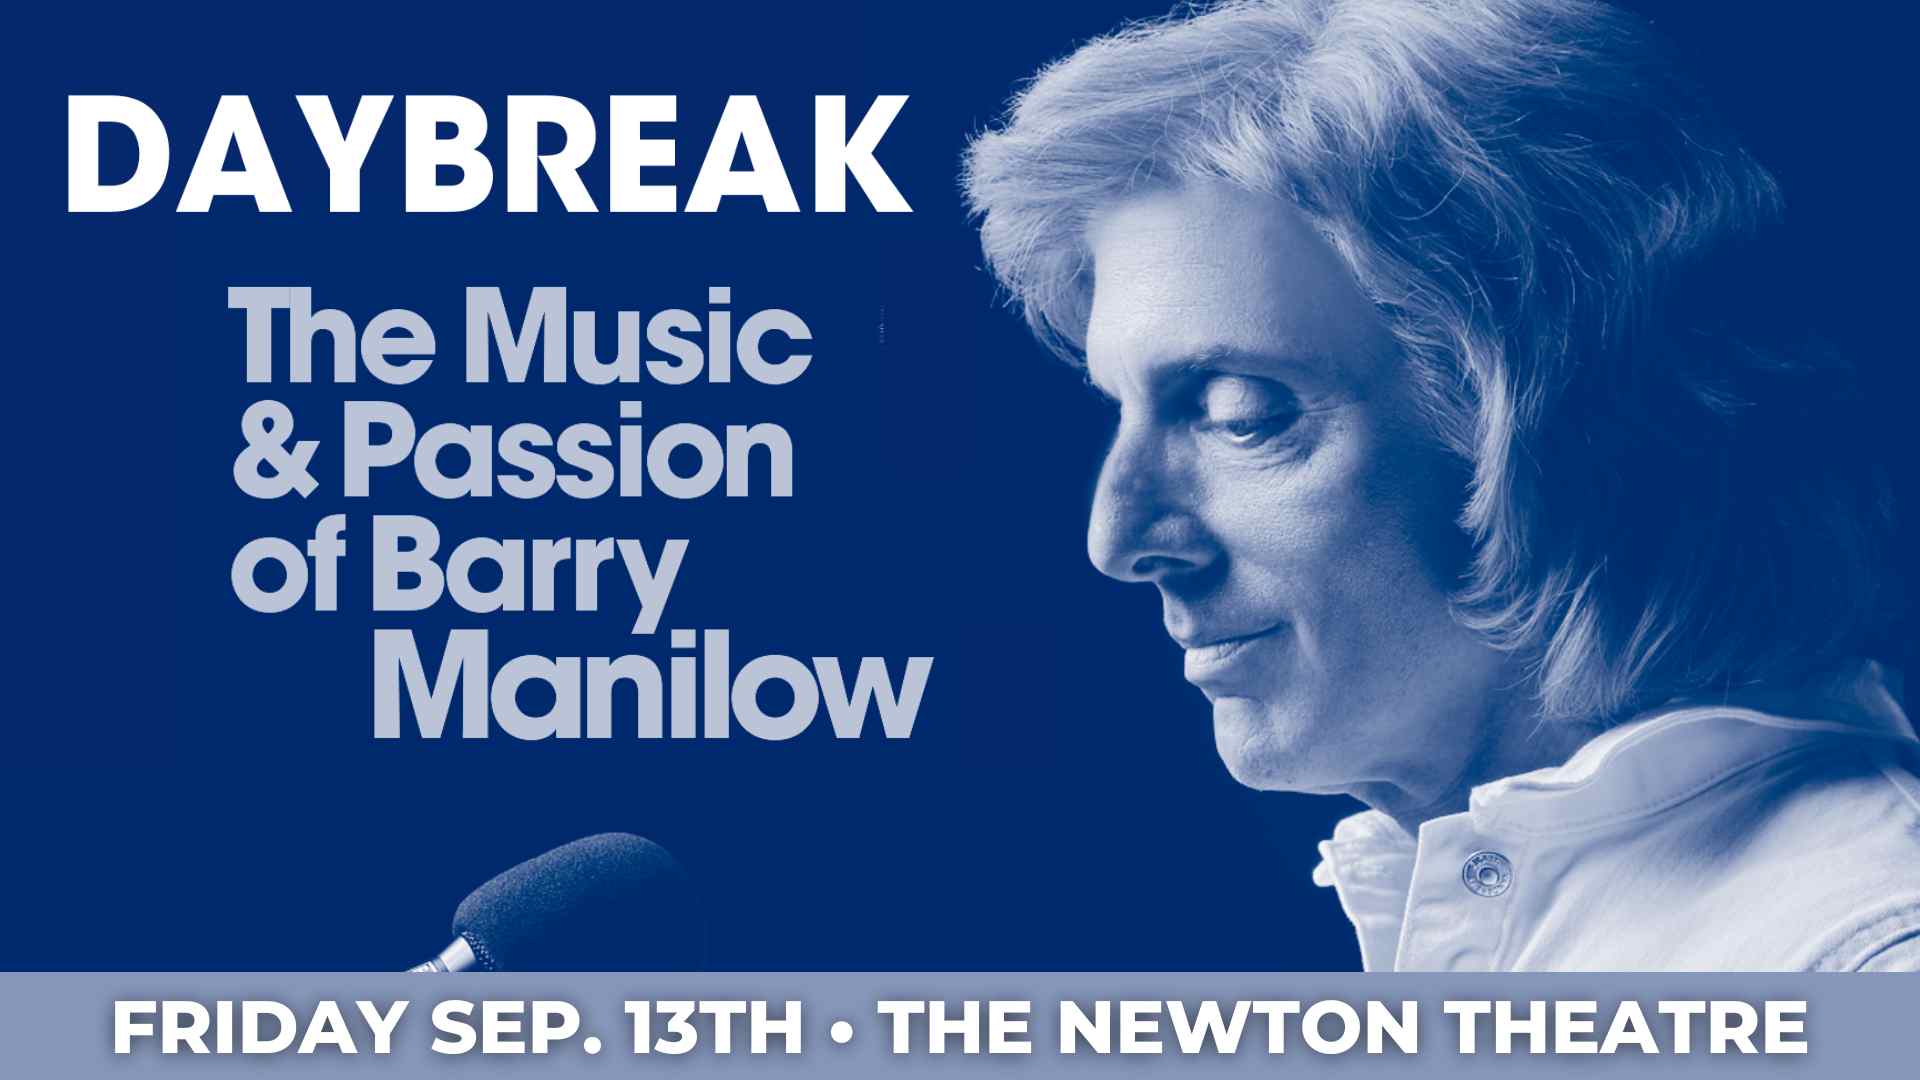 Daybreak - A Tribute to Barry Manilow comes to The Newton Theatre on Friday, September 13th.